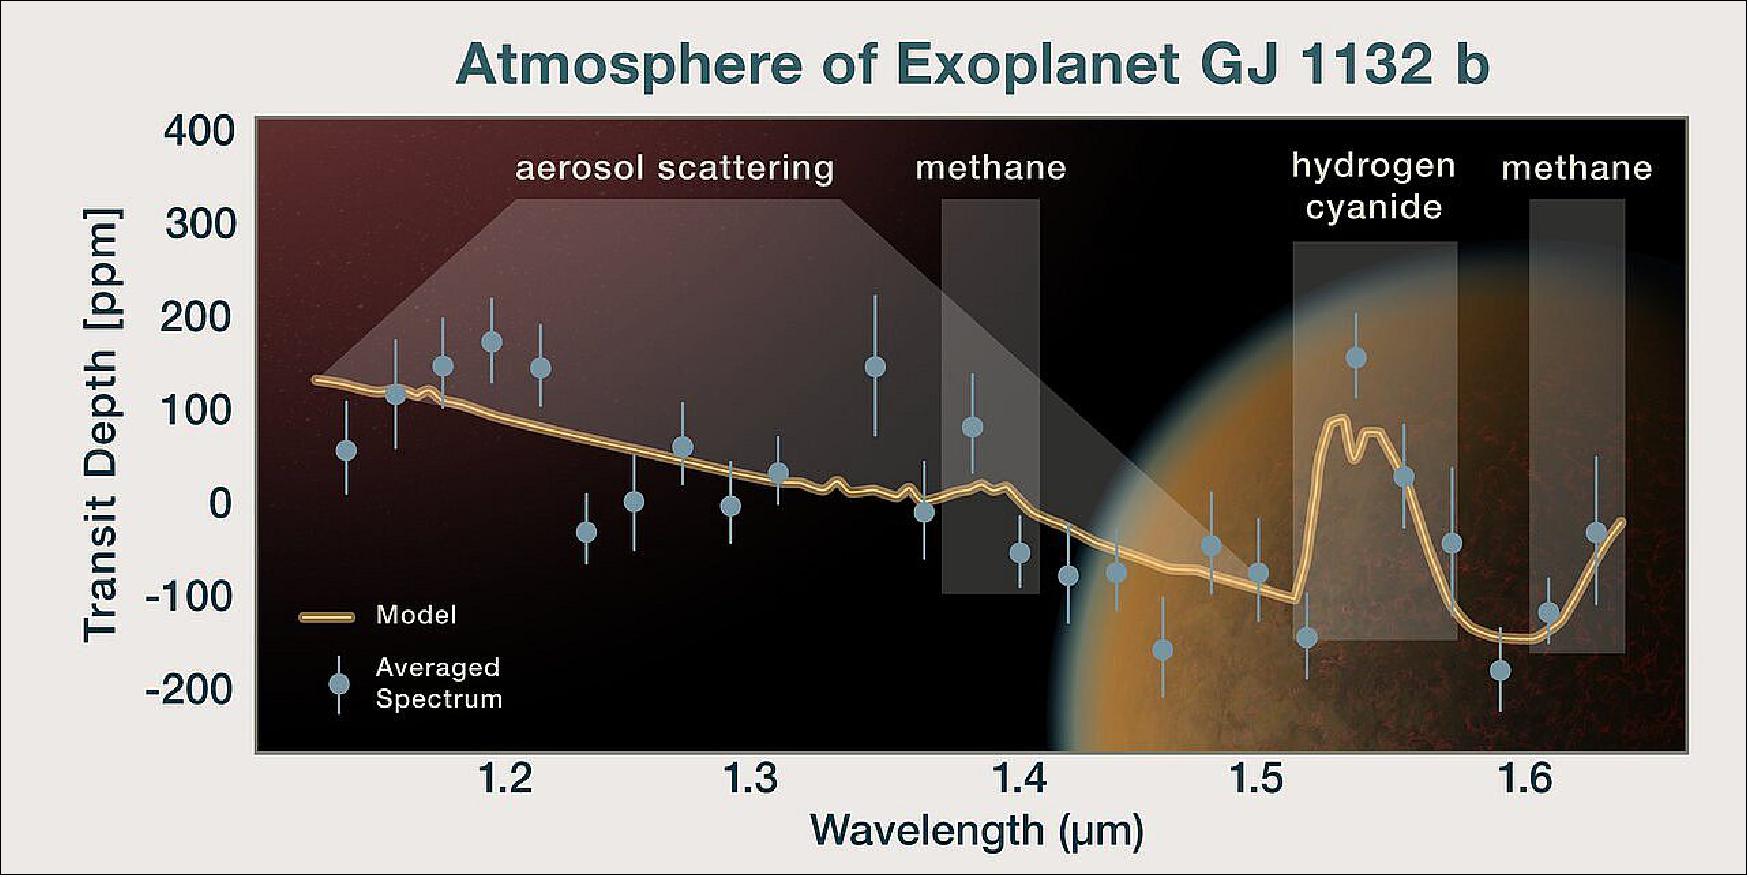 Figure 109: This plot shows the spectrum of the atmosphere of an Earth sized rocky exoplanet, GJ 1132 b, which is overlaid on an artist's impression of the planet. The orange line represents the model spectrum. In comparison, the observed spectrum is shown as blue dots representing averaged data points, along with their error bars. - This analysis is consistent with GJ 1132 b being predominantly a hydrogen atmosphere with a mix of methane and hydrogen cyanide. The planet also has aerosols which cause scattering of light. - This is the first time a so-called "secondary atmosphere," which was replenished after the planet lost its primordial atmosphere, has been detected on a world outside of our solar system [image credit: NASA, ESA, and P. Jeffries (STScI)]